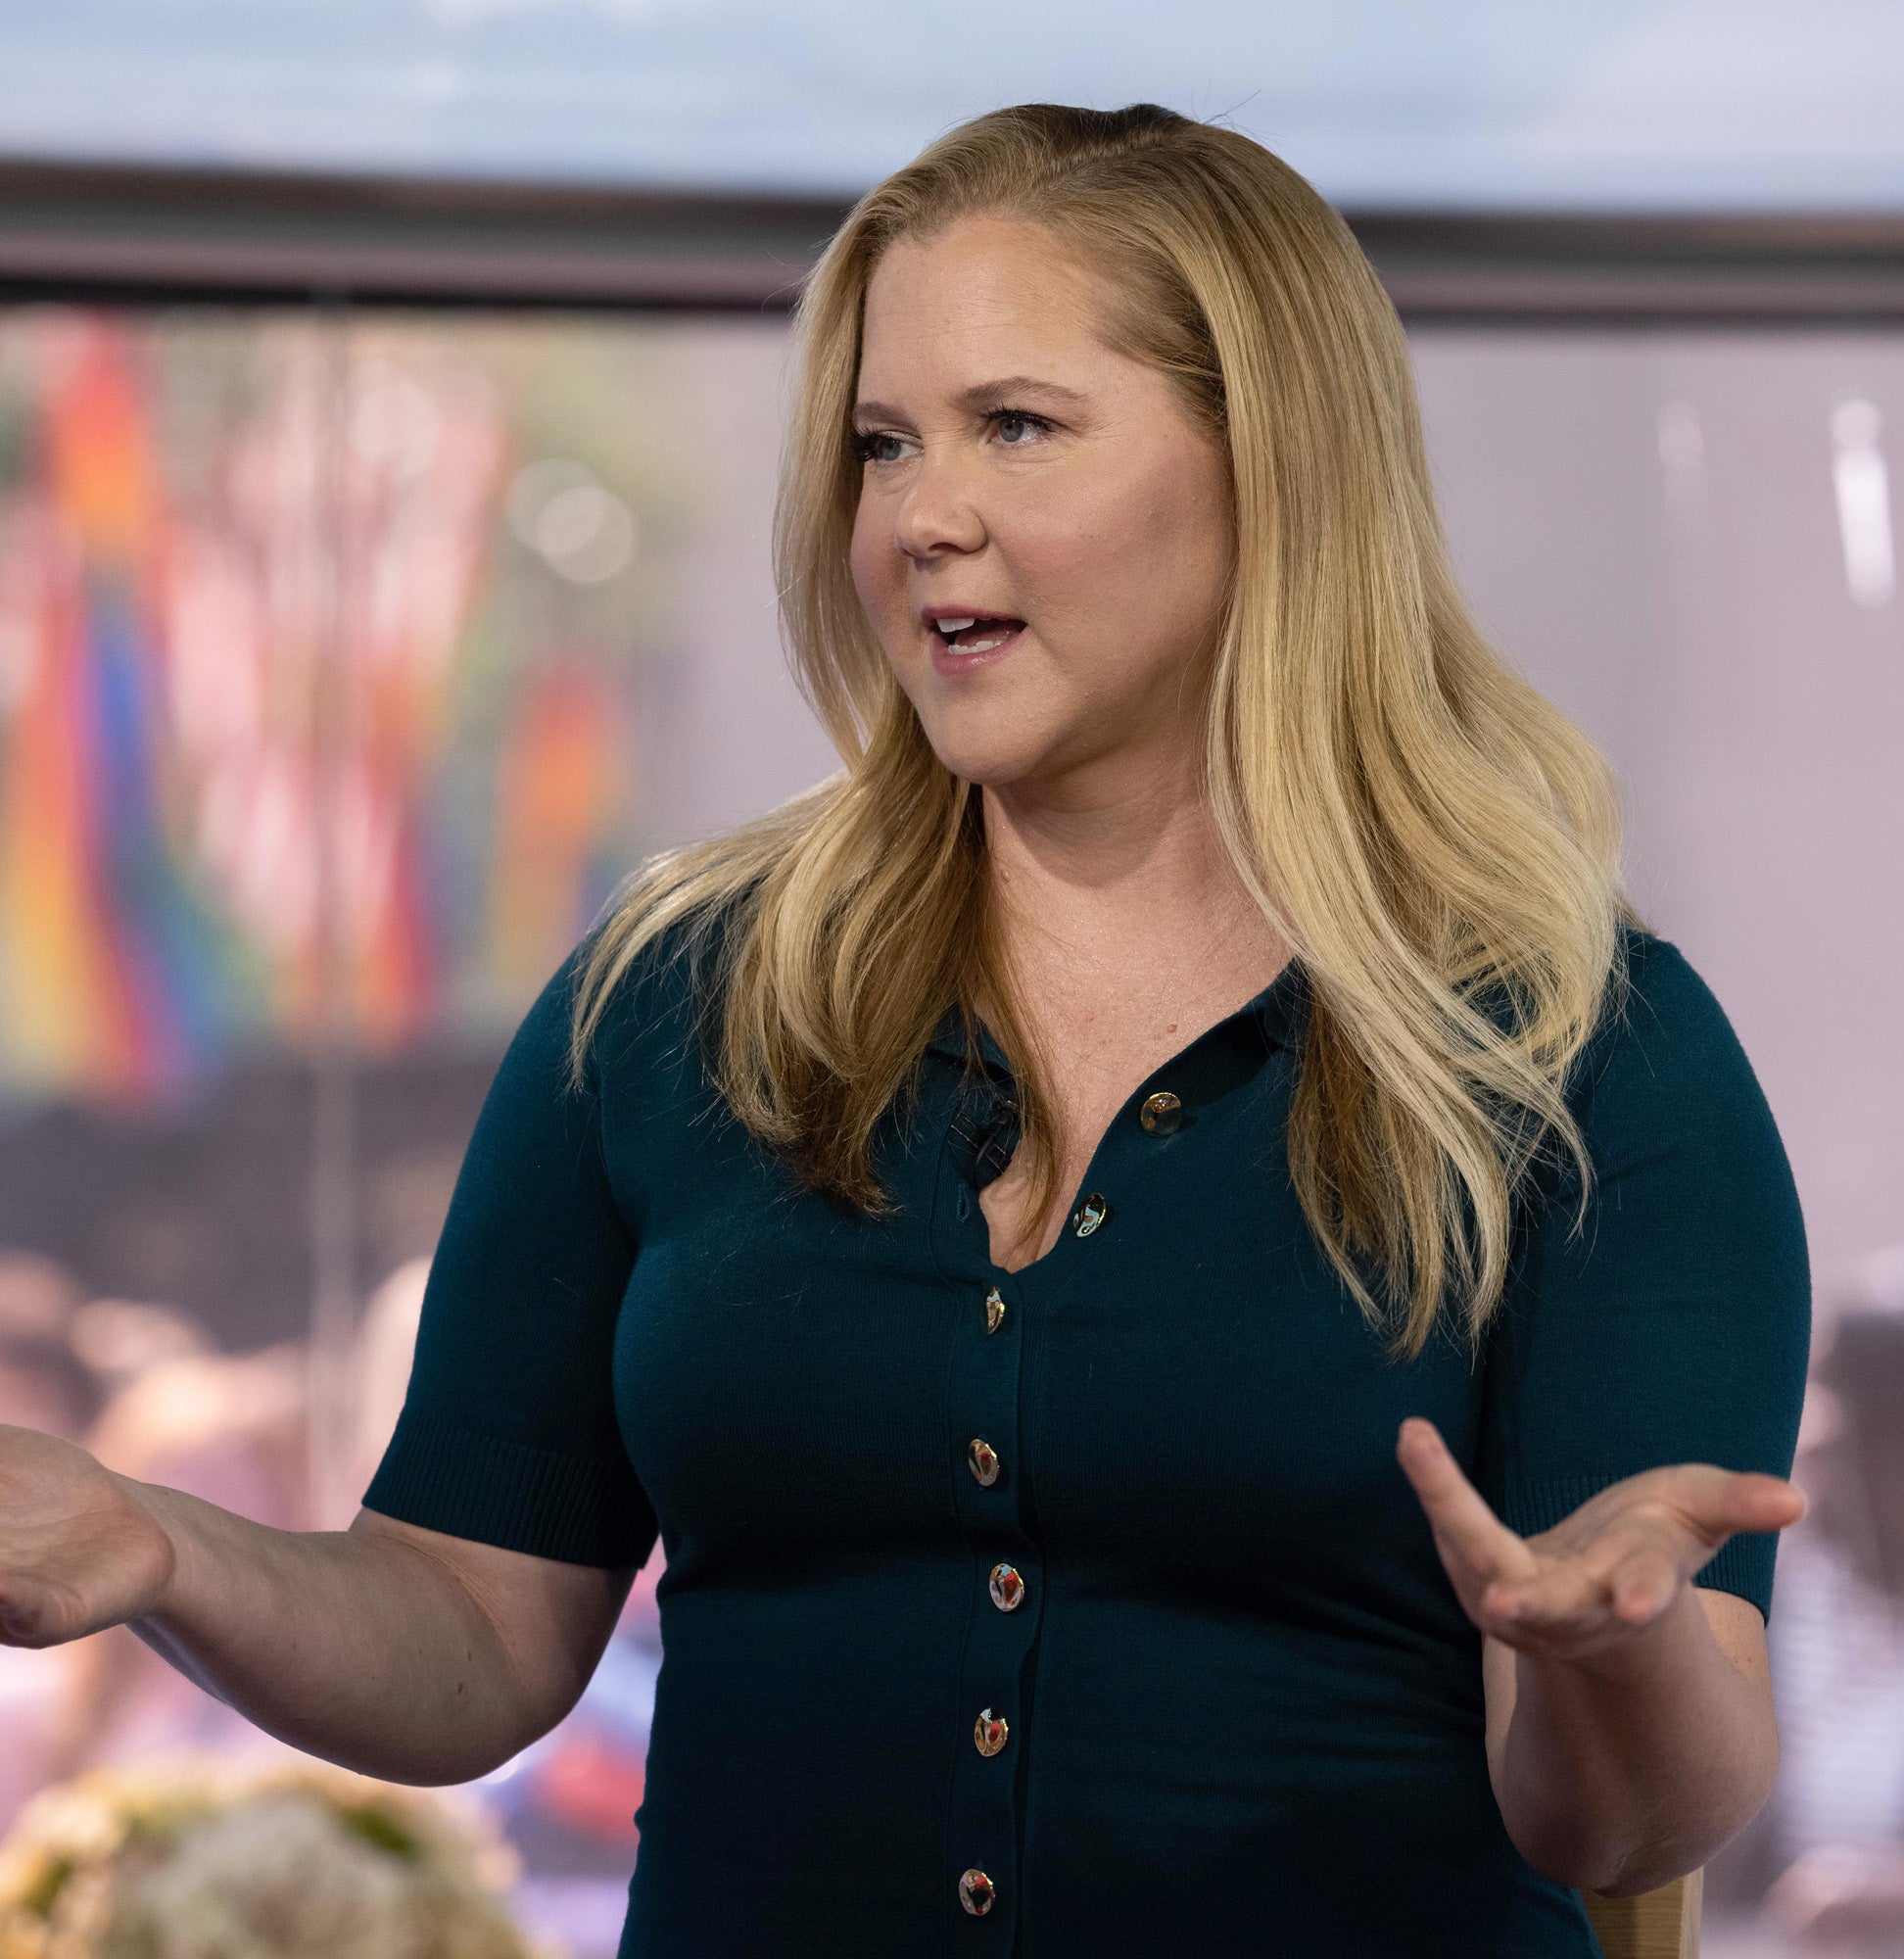 Amy Schumer in a casual outfit gestures while speaking, with blurry background